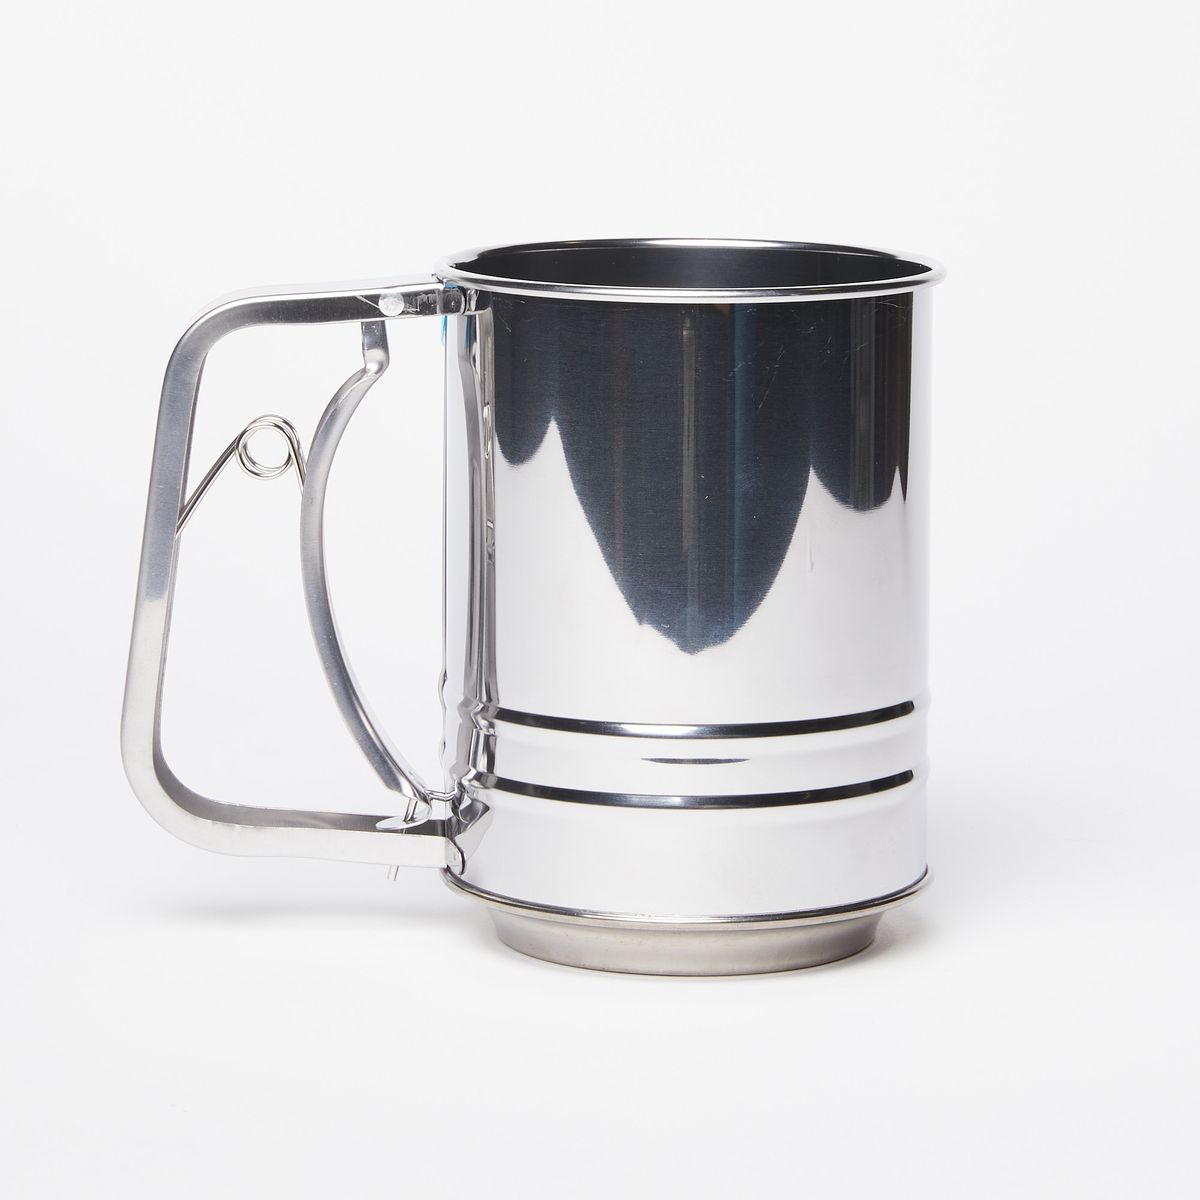 Shiny metal flour sifter with handle on the left on a white background